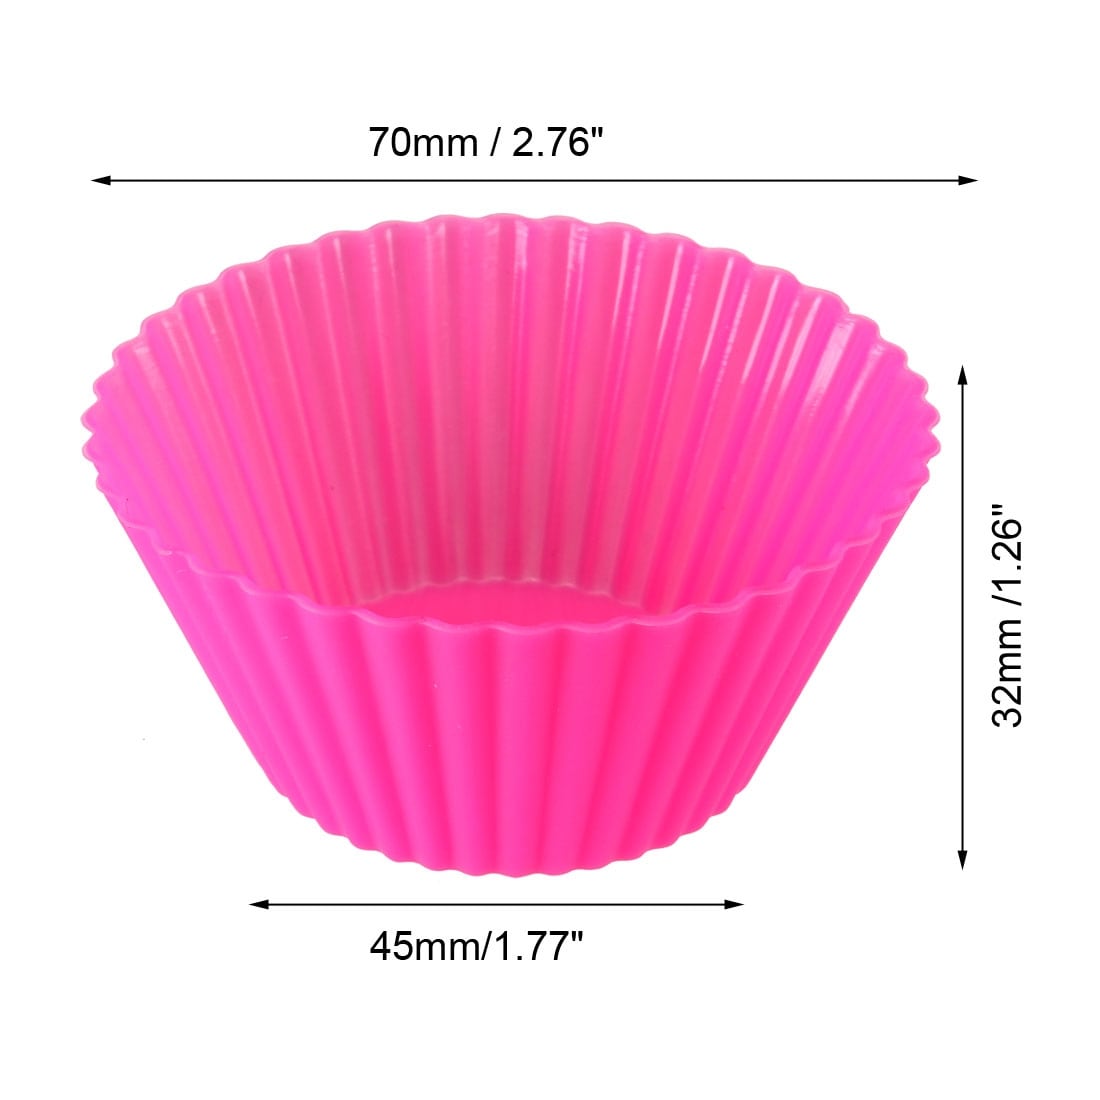 https://ak1.ostkcdn.com/images/products/is/images/direct/85086508ec24ffec2a4967409ac7e069258e8241/Silicone-Cupcake-Liners-Reusable-Baking-Cups-Nonstick-Pastry.jpg